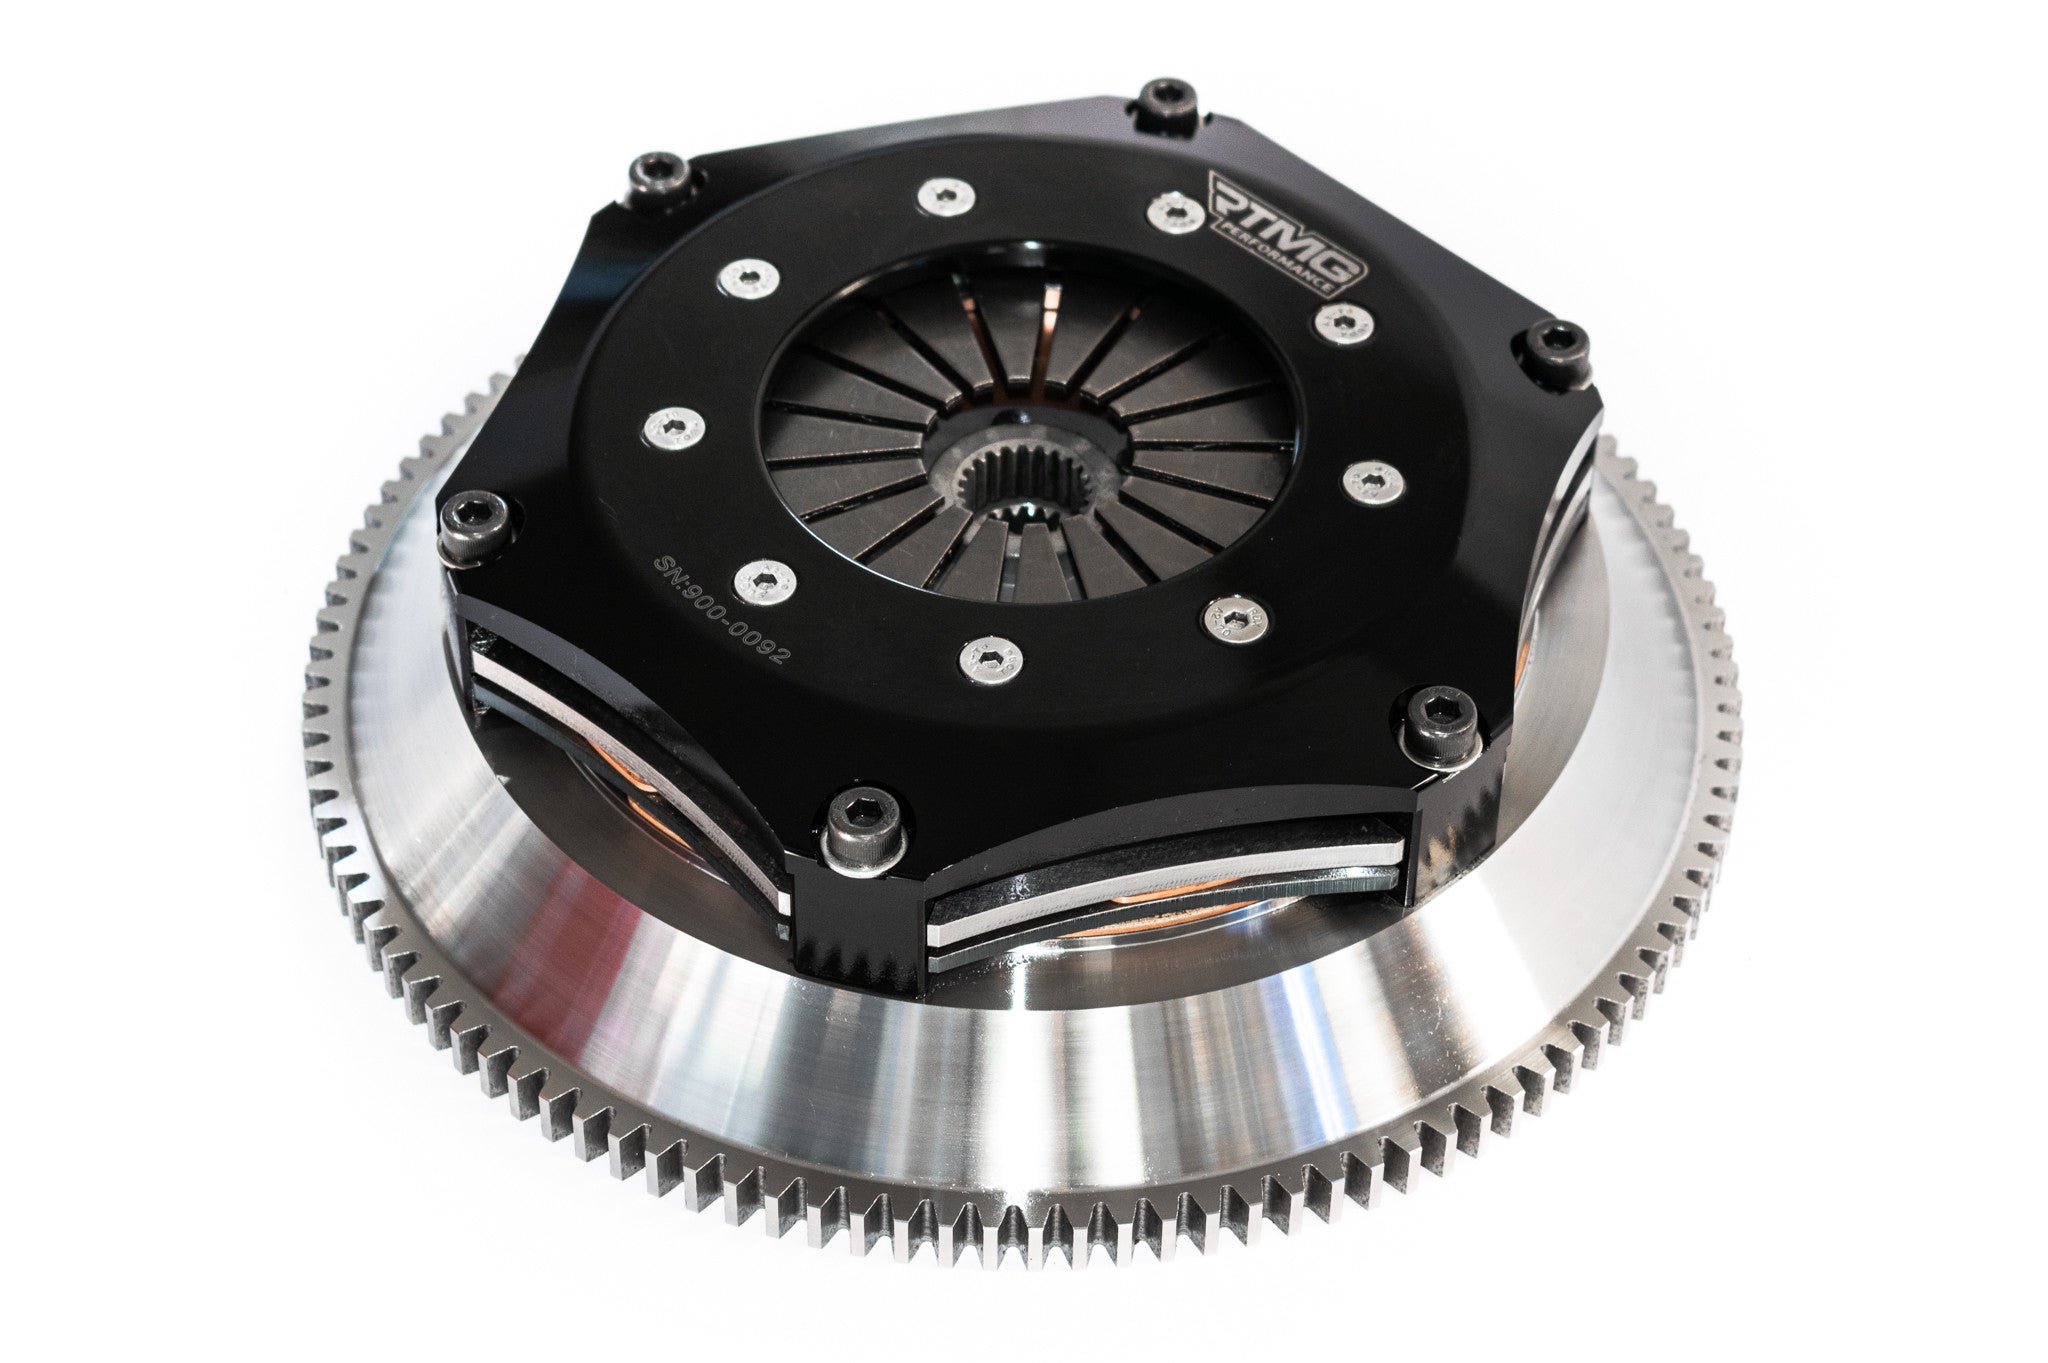 Twin Disk Clutch Kit for Mazda 3 MPS - RTMG Performance